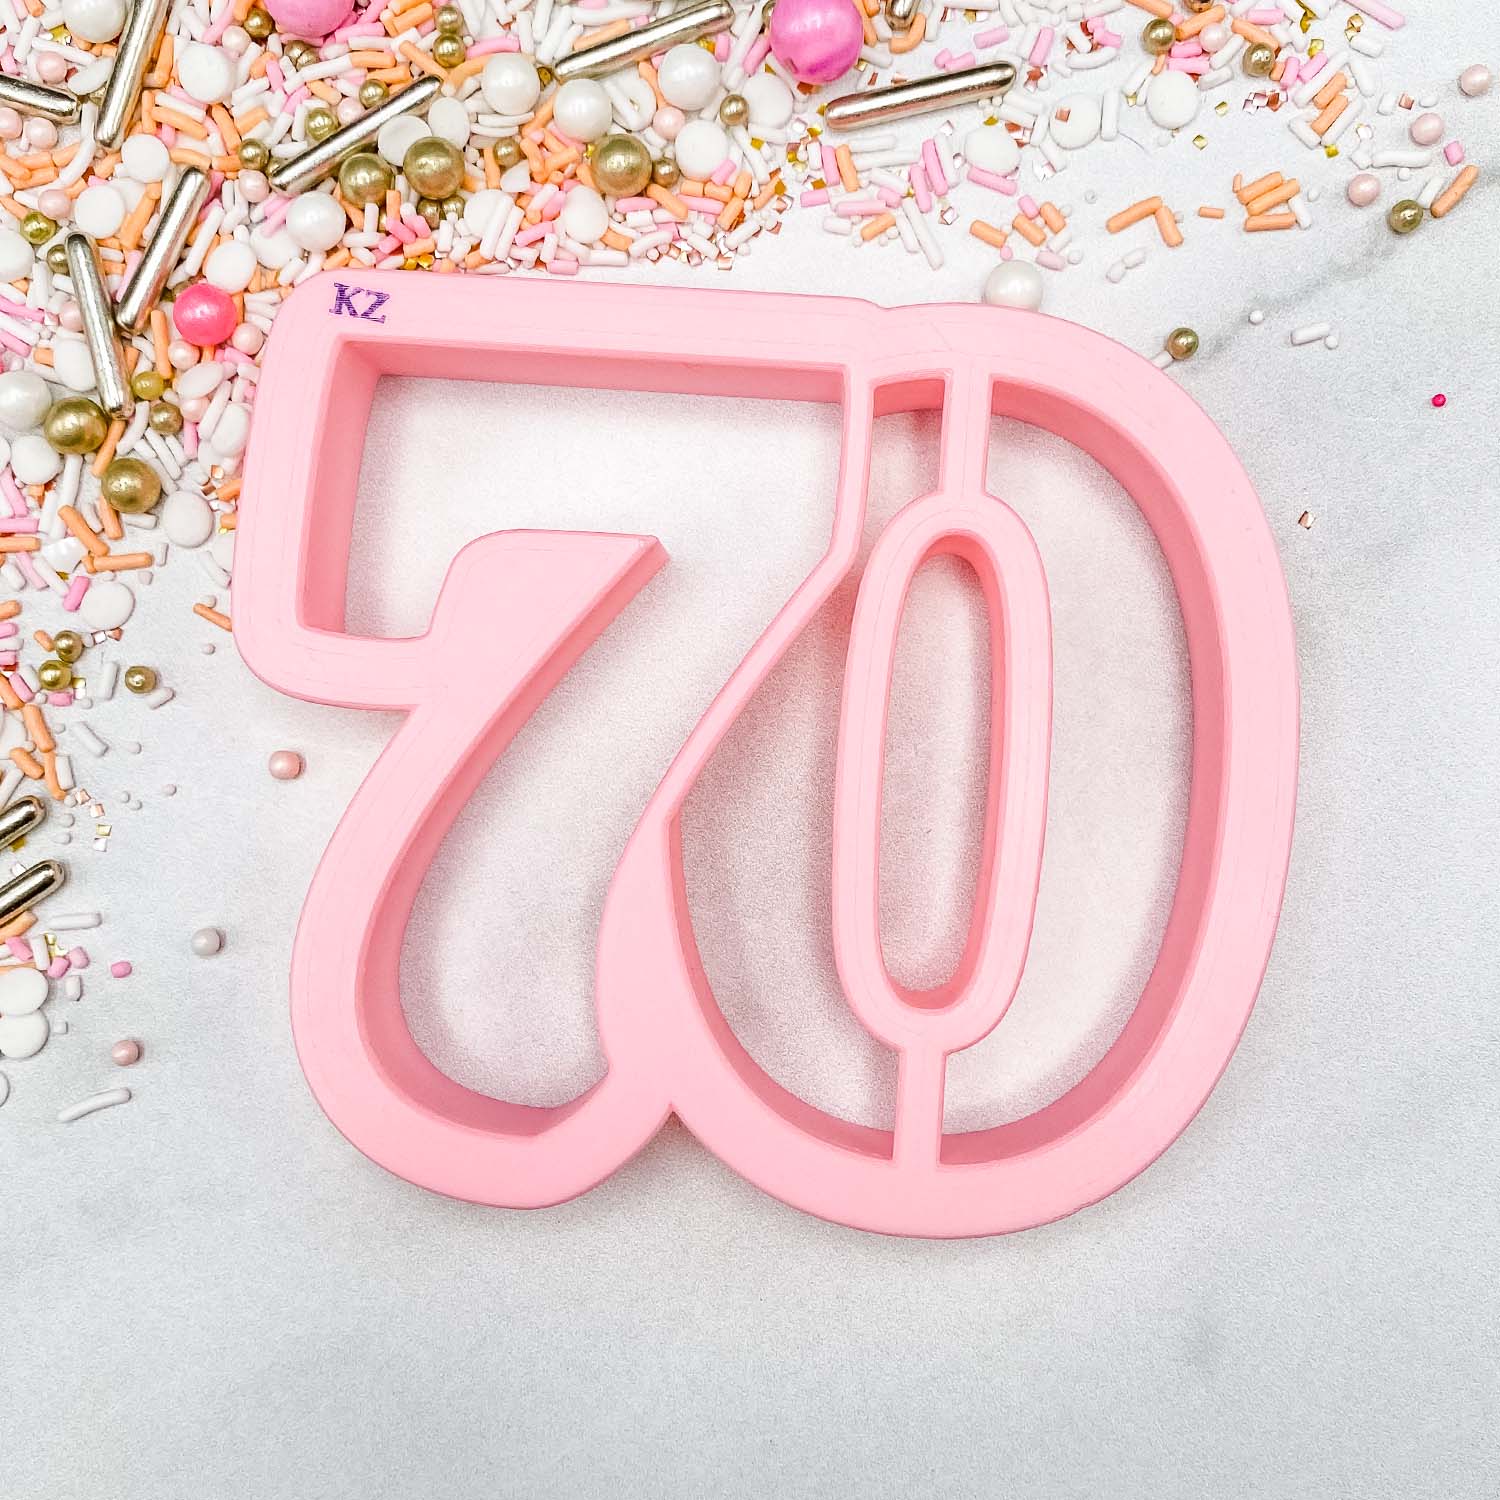 cookie cutter in the shape of the number 70